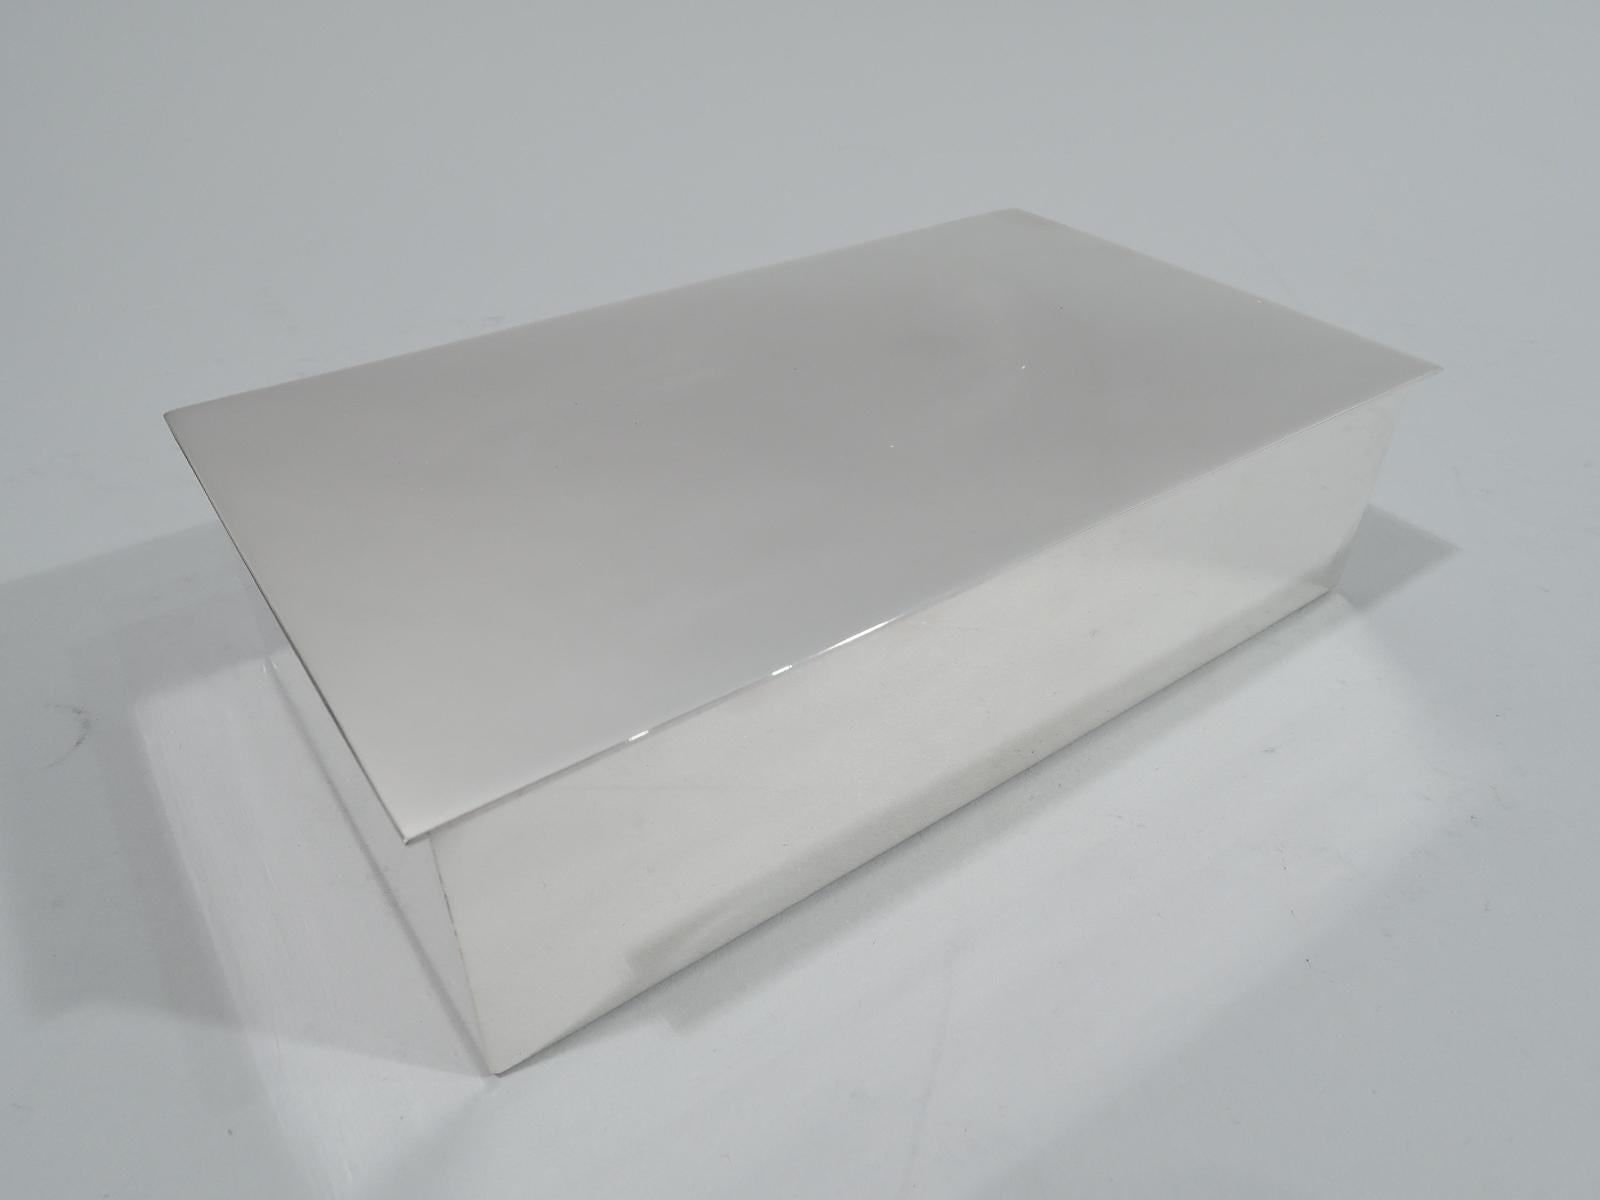 Mid-Century Modern sterling silver box. Made by Tiffany & Co. in New York. Rectangular with straight sides and crisp corners. Cover is hinged and flat with slight overhang. Box interior cedar lined. Austere and functional. Fully marked including